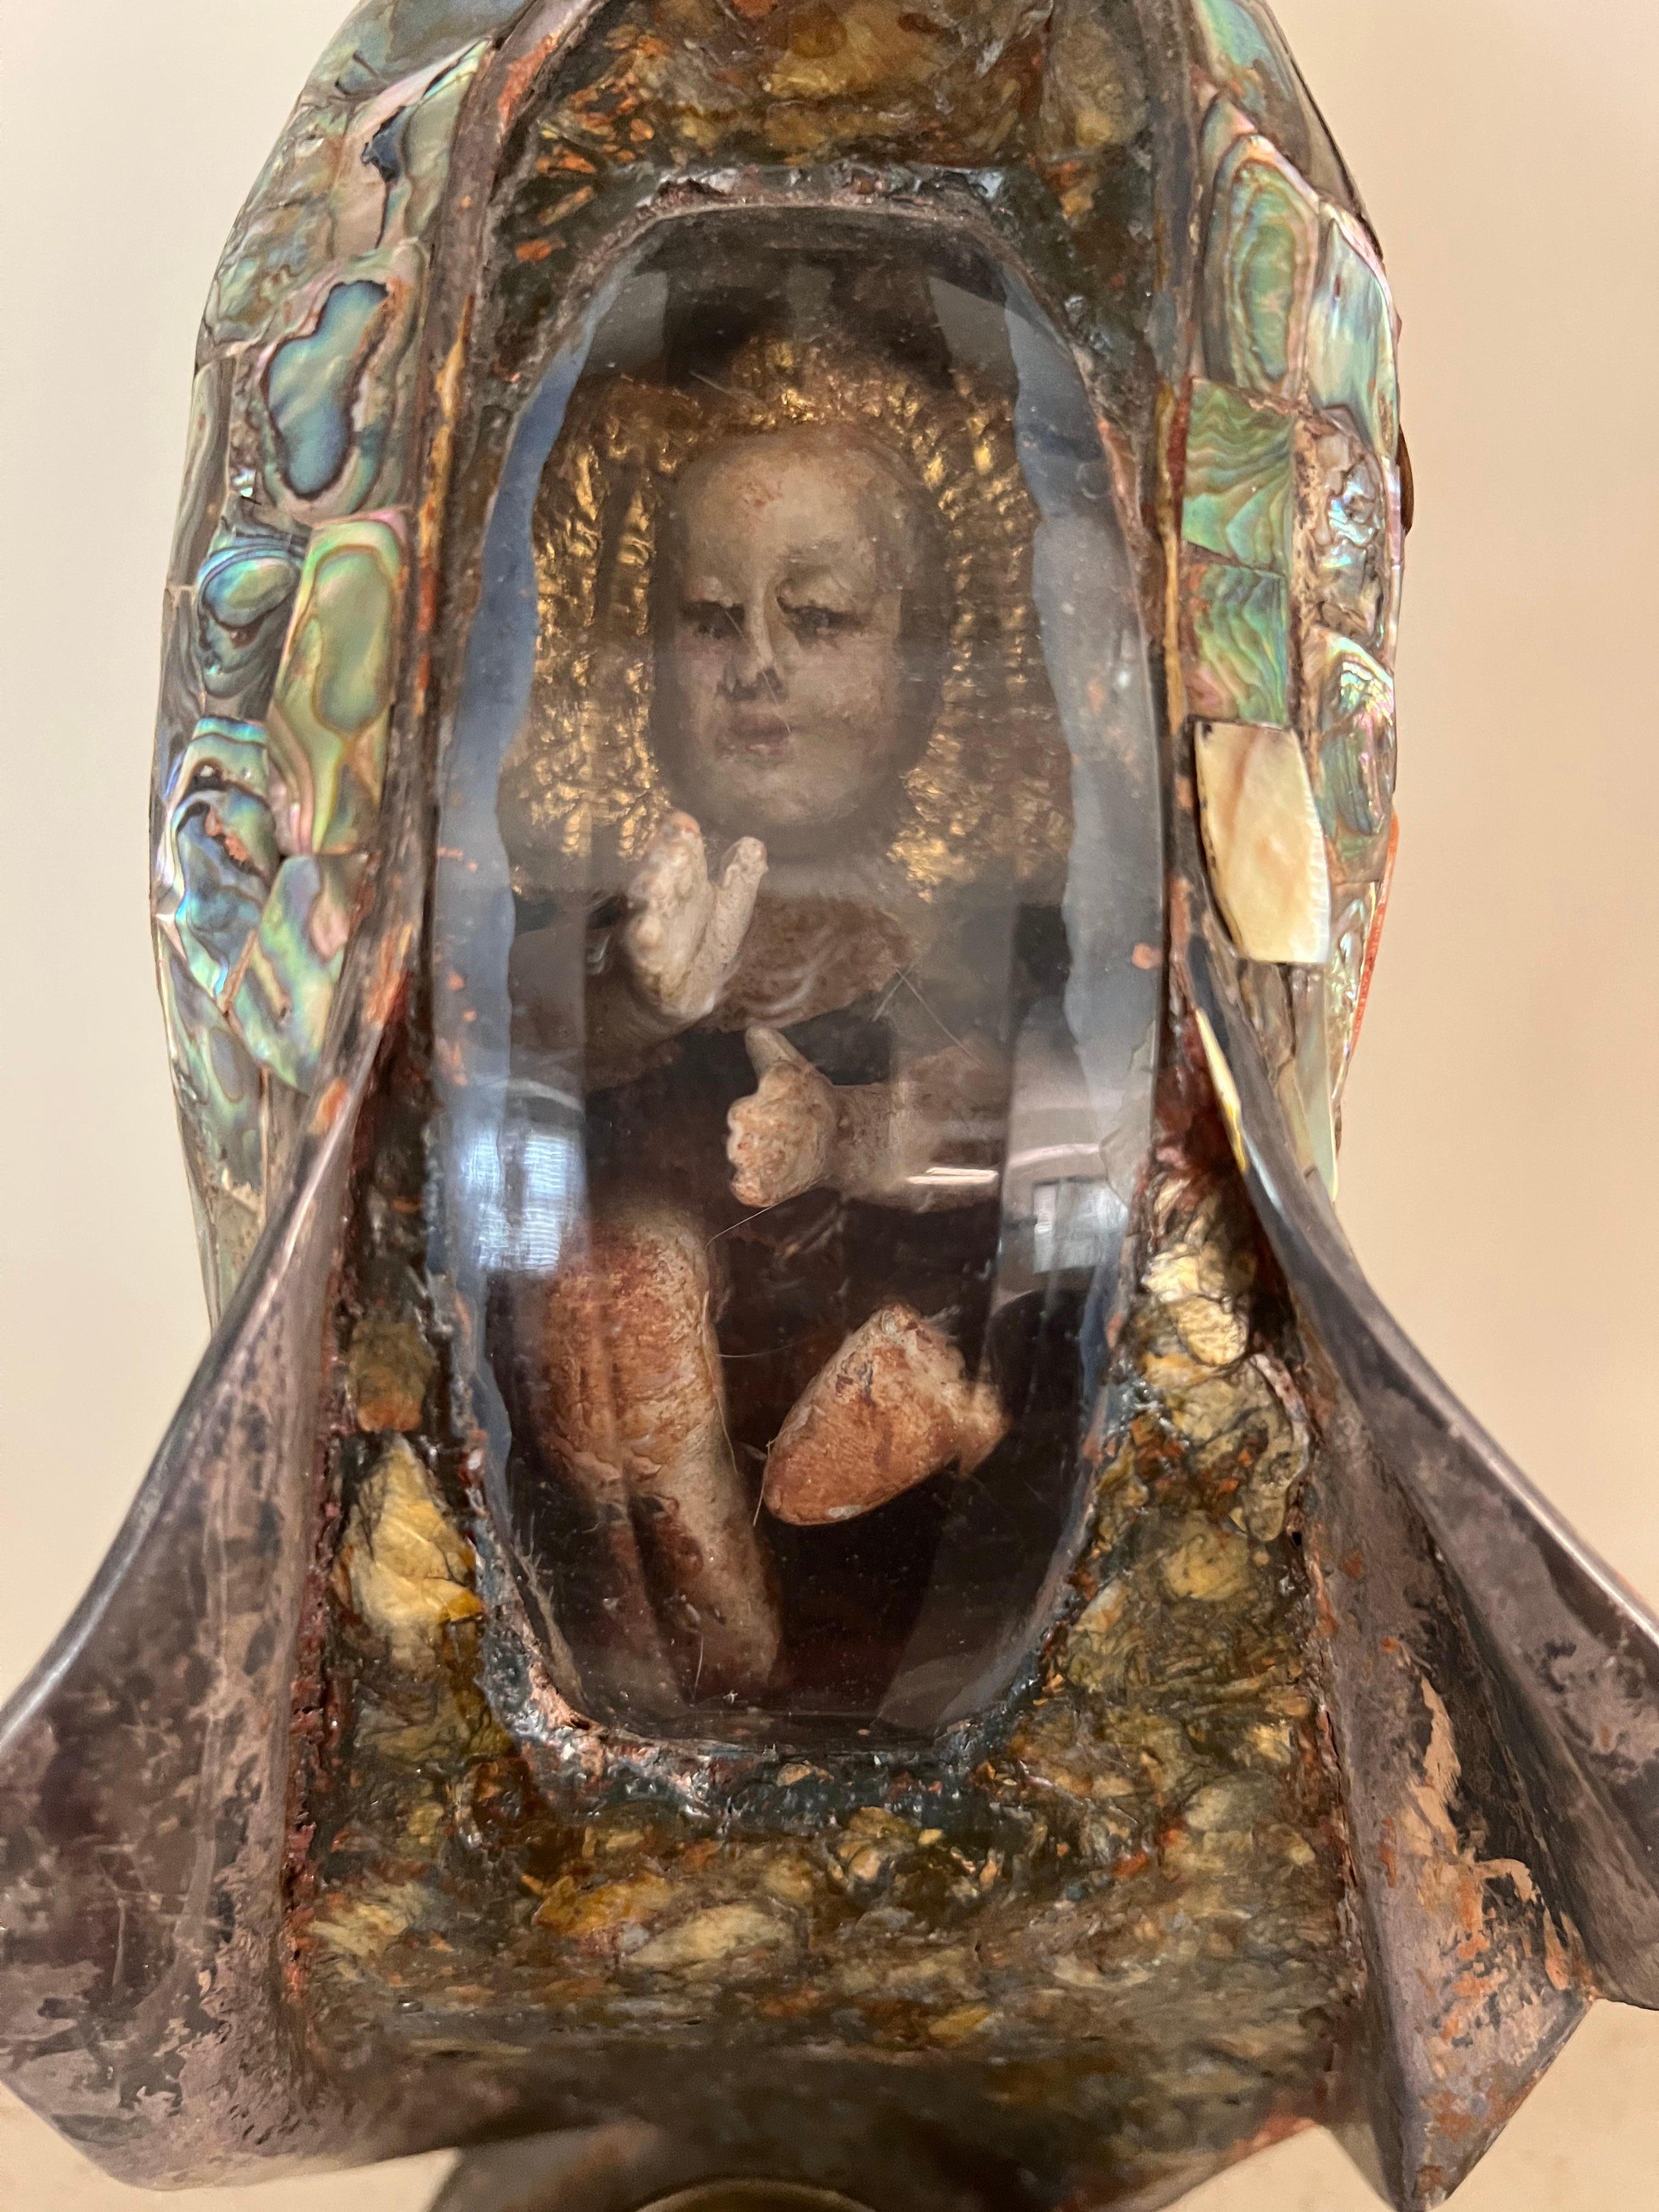 - Silver and abalone shell overlay.
- The statue depicts the mother of God with Jesus in her stomach with a cup for holy water.
- Signed by Los Castillos and hallmarked with 400.
- Made in Mexico.
 
The height of the cup is 1 1/2